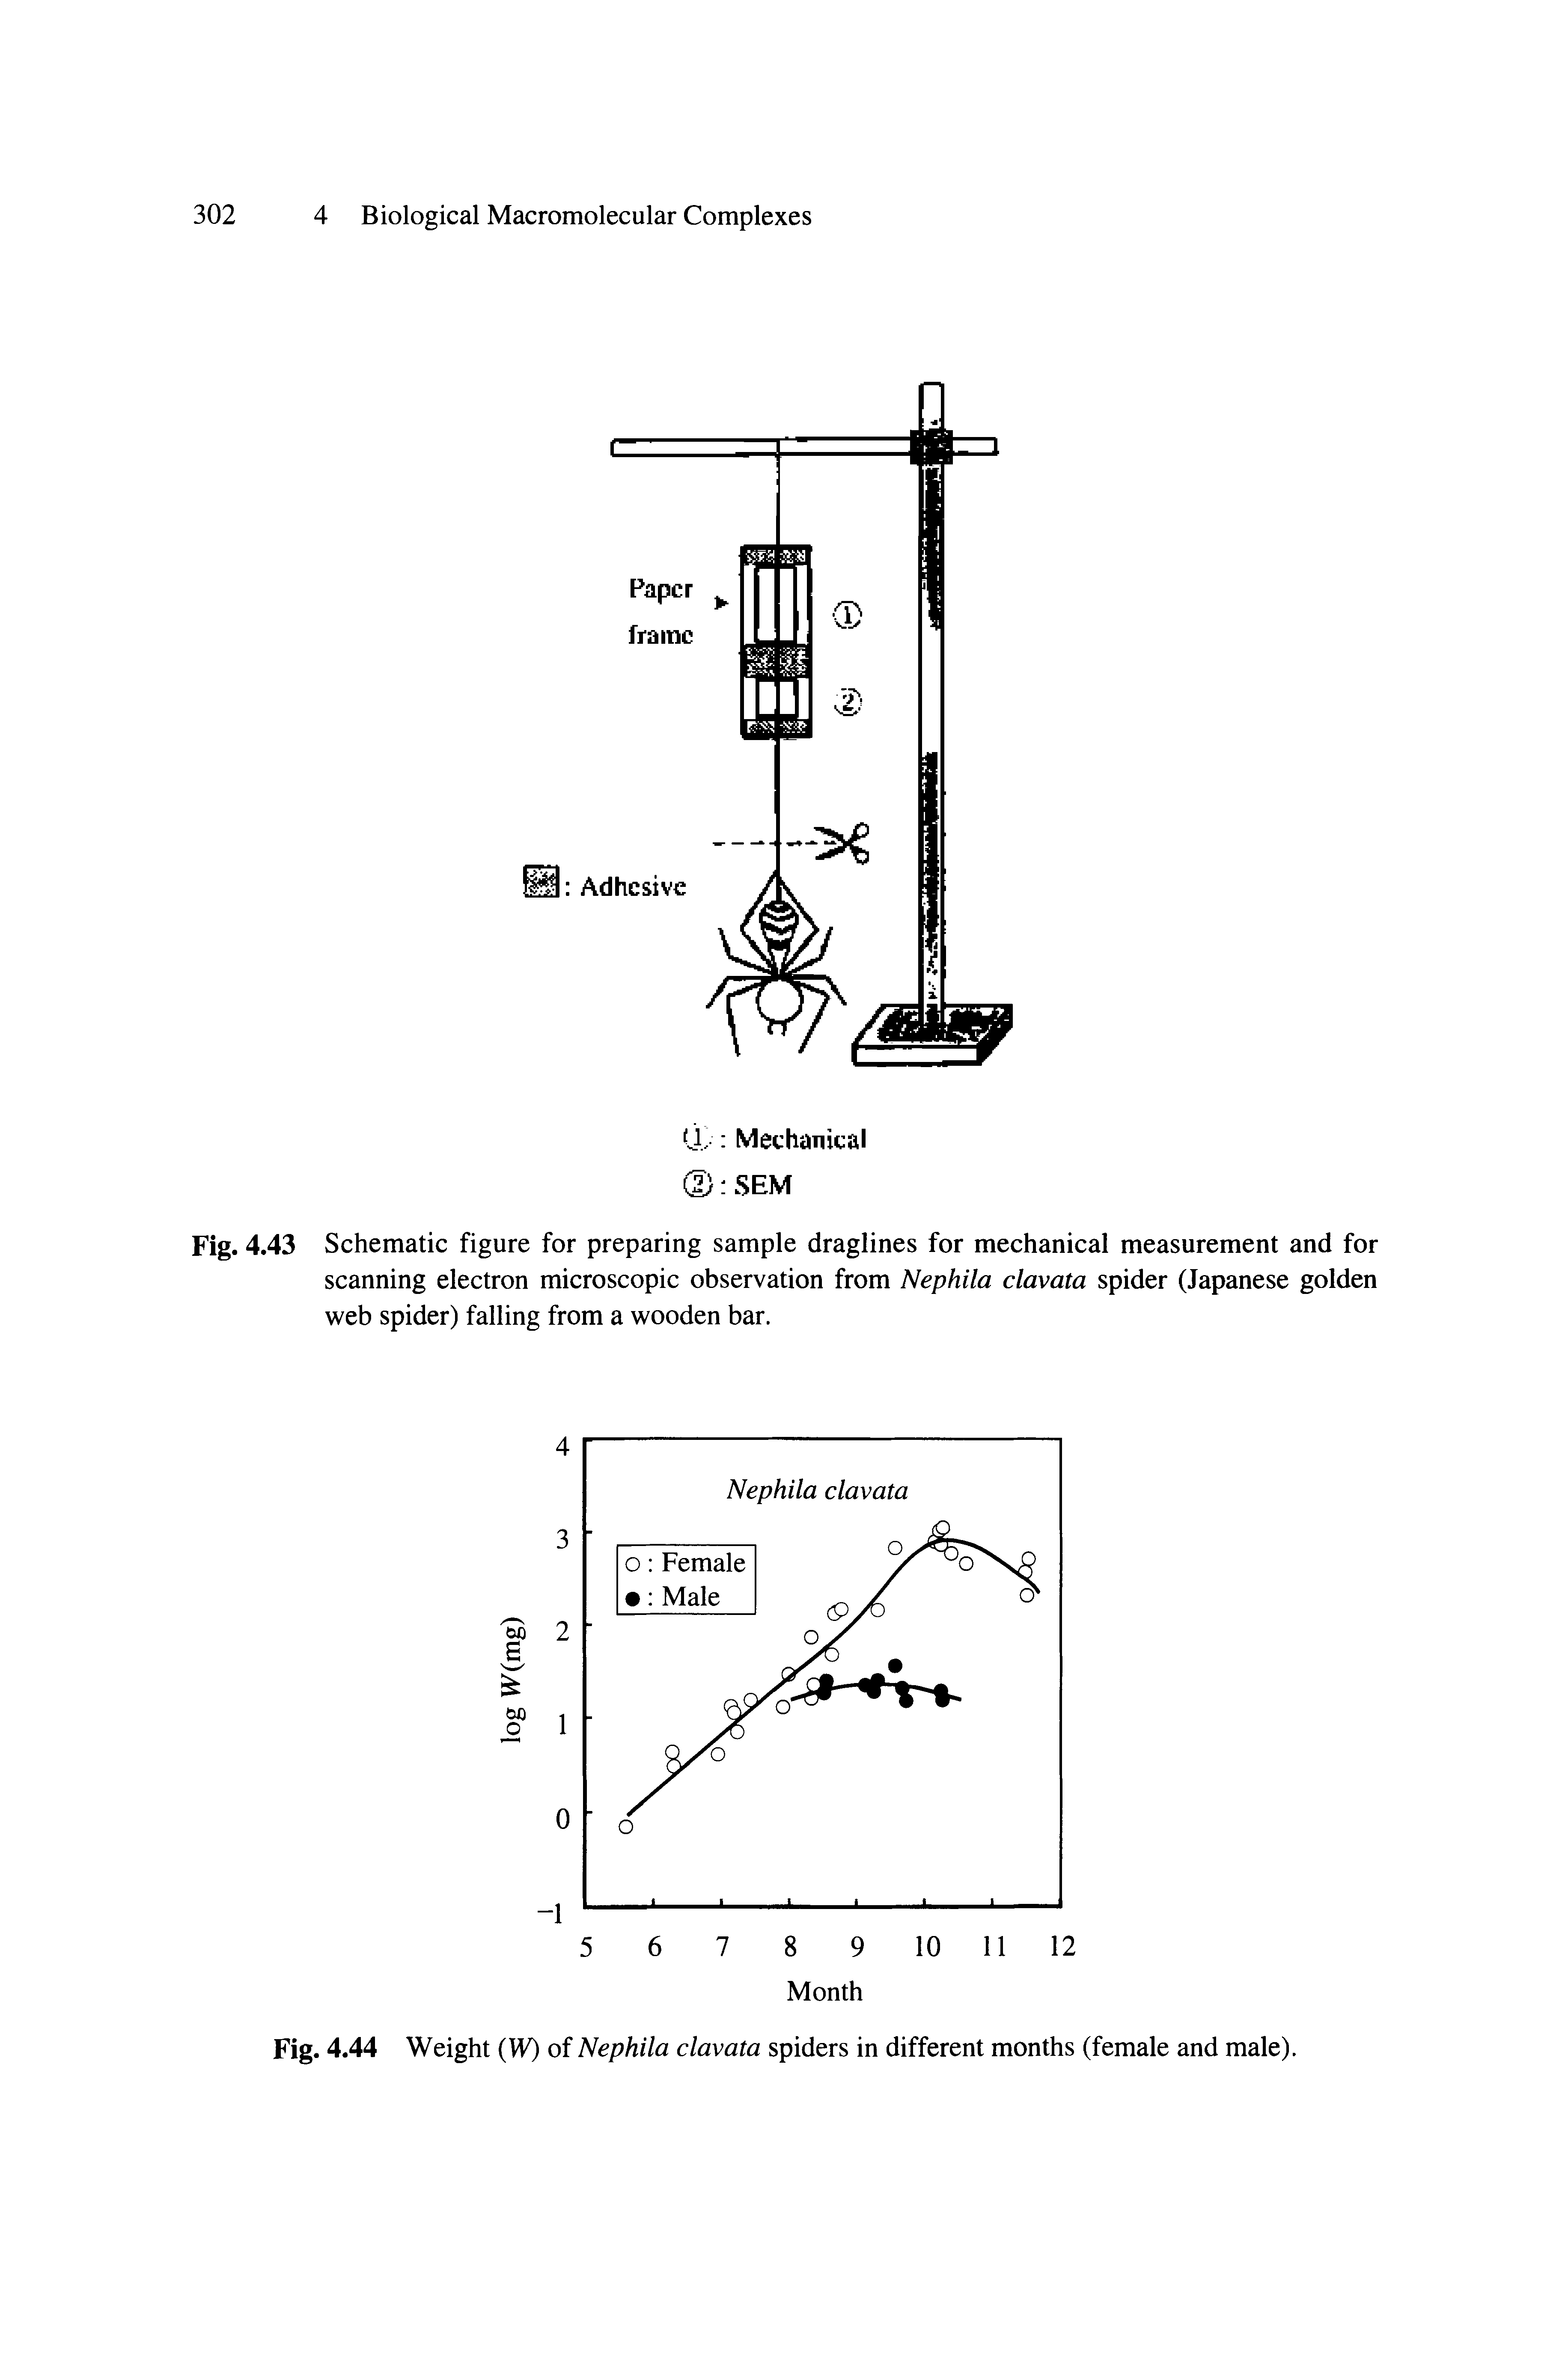 Fig. 4.43 Schematic figure for preparing sample draglines for mechanical measurement and for scanning electron microscopic observation from Nephila clavata spider (Japanese golden web spider) falling from a wooden bar.